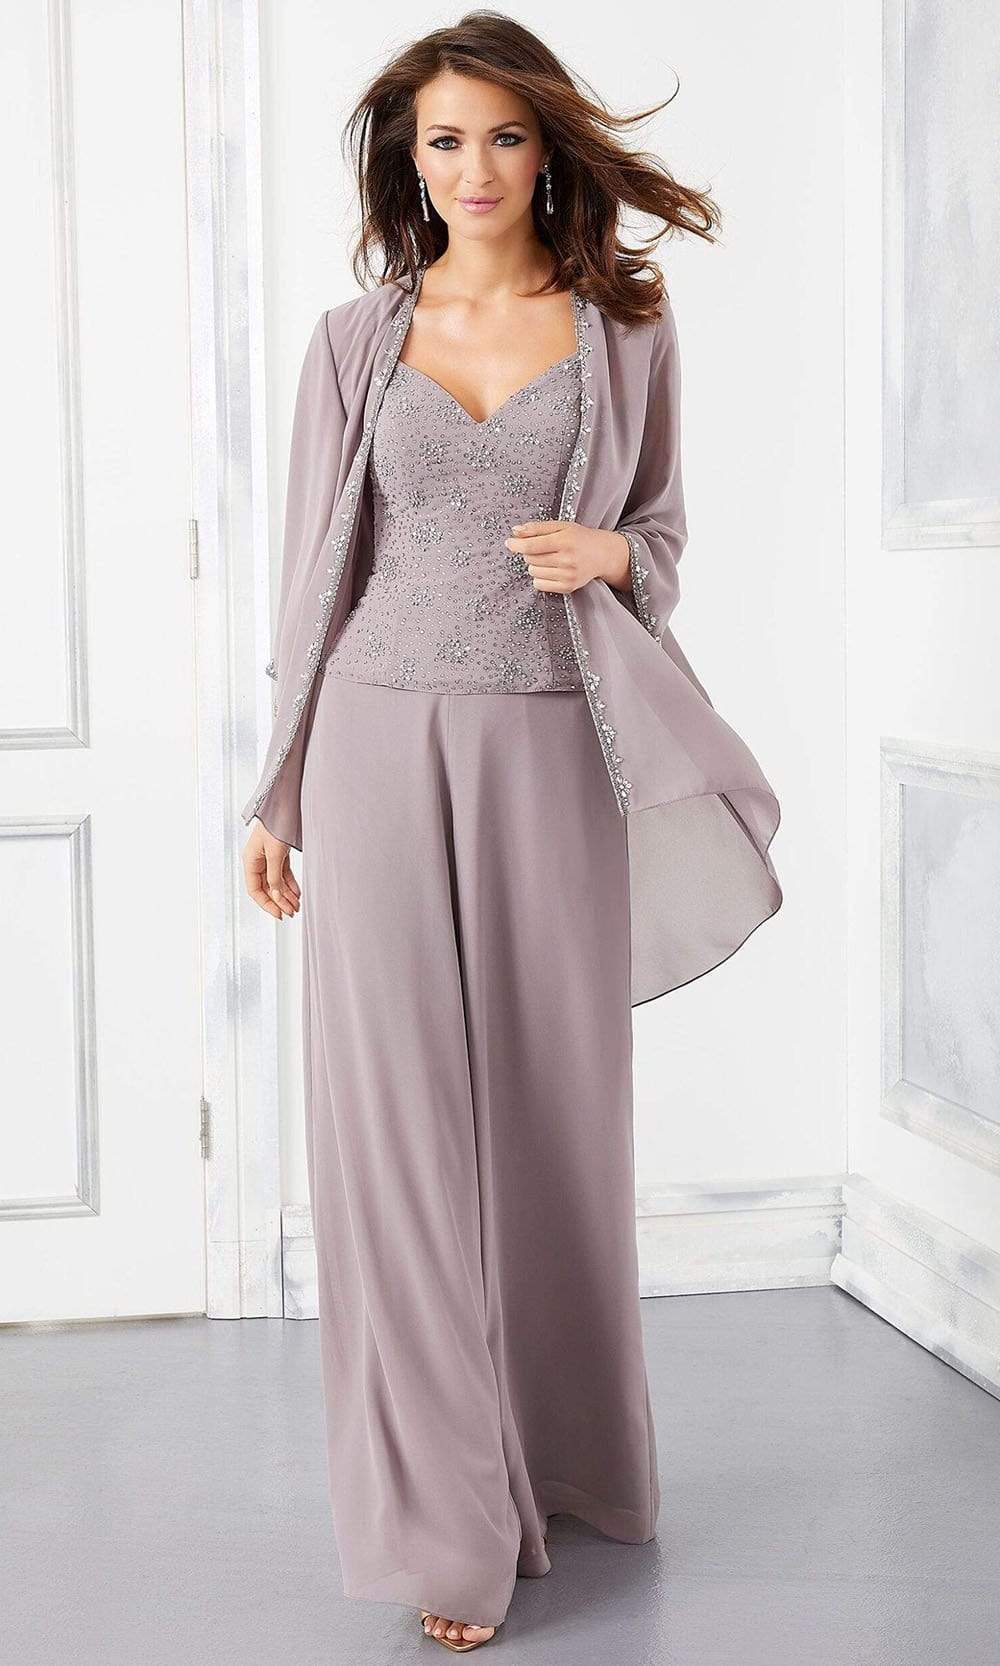 Elegant Formal Plus Size Jumpsuit, Mother of the Bride Jumpsuit,  Alternative Wedding Outfit, Cocktail Party Overall, Dressy Palazzo Jumpsuit  -  Canada